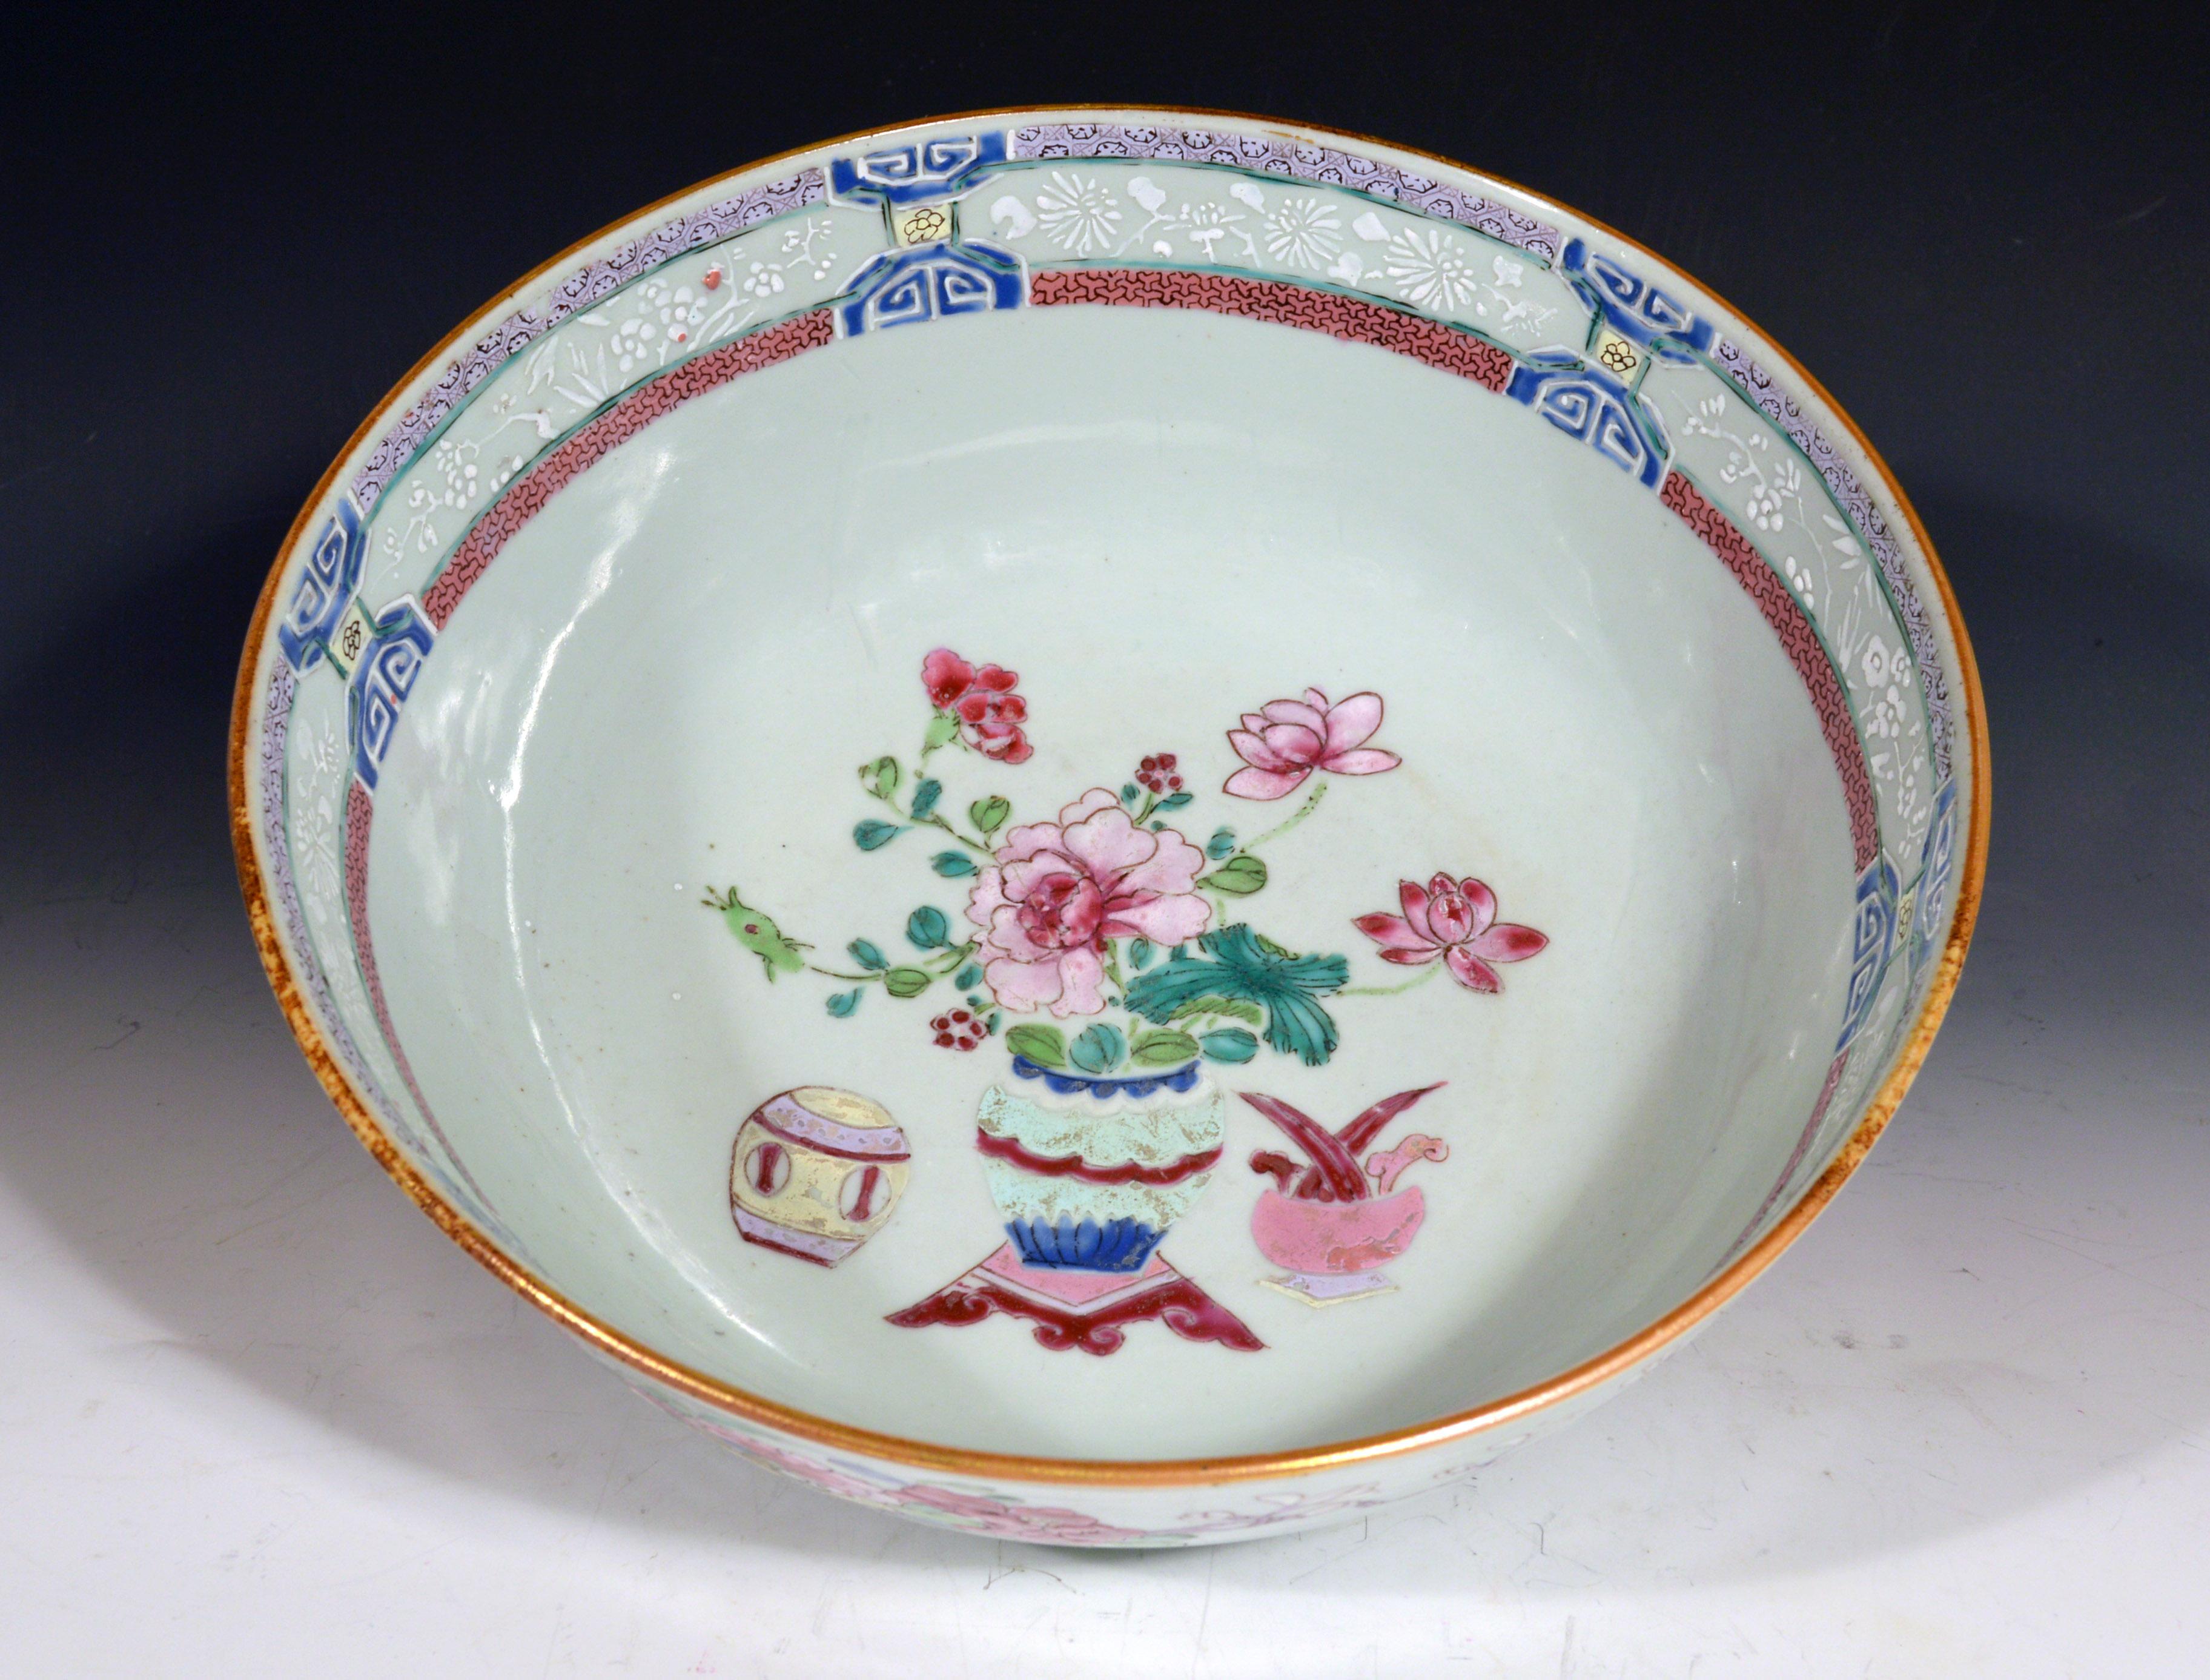 18th Century Chinese Export Porcelain Bowl with Chinese Domestic Furniture For Sale 1